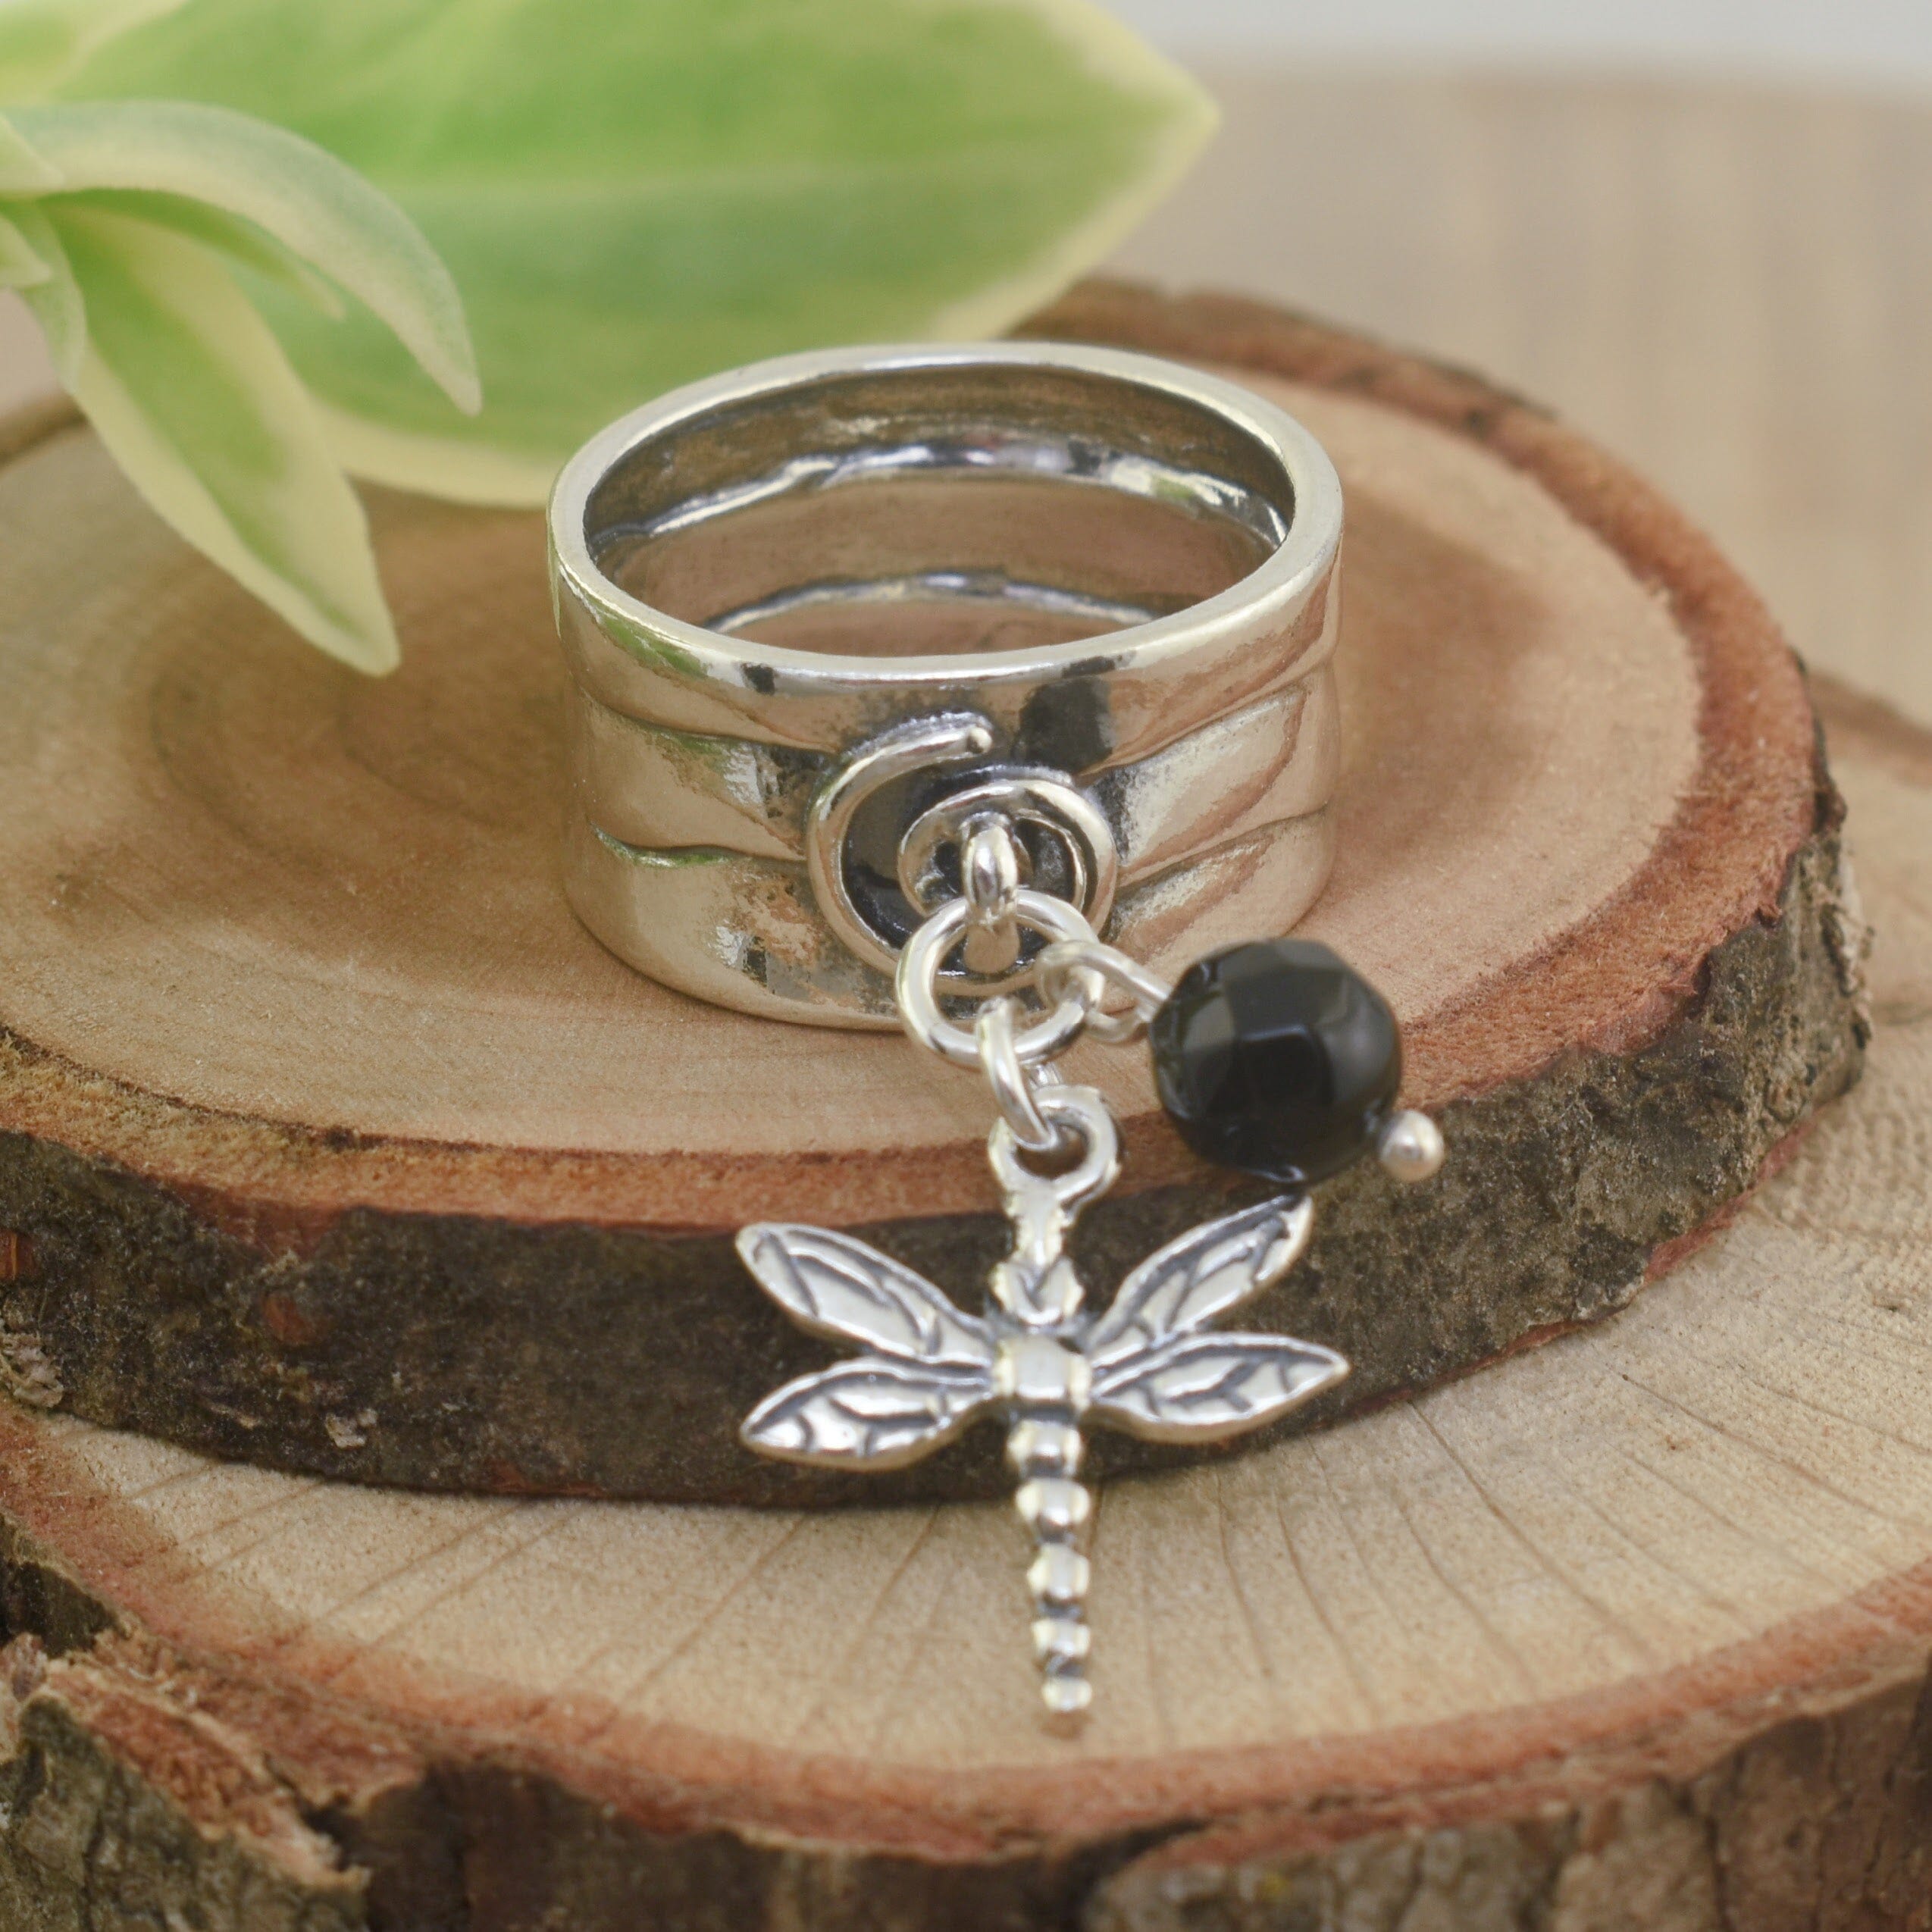 .925 sterling silver ring with dangling black onyx stone and dragonfly charm